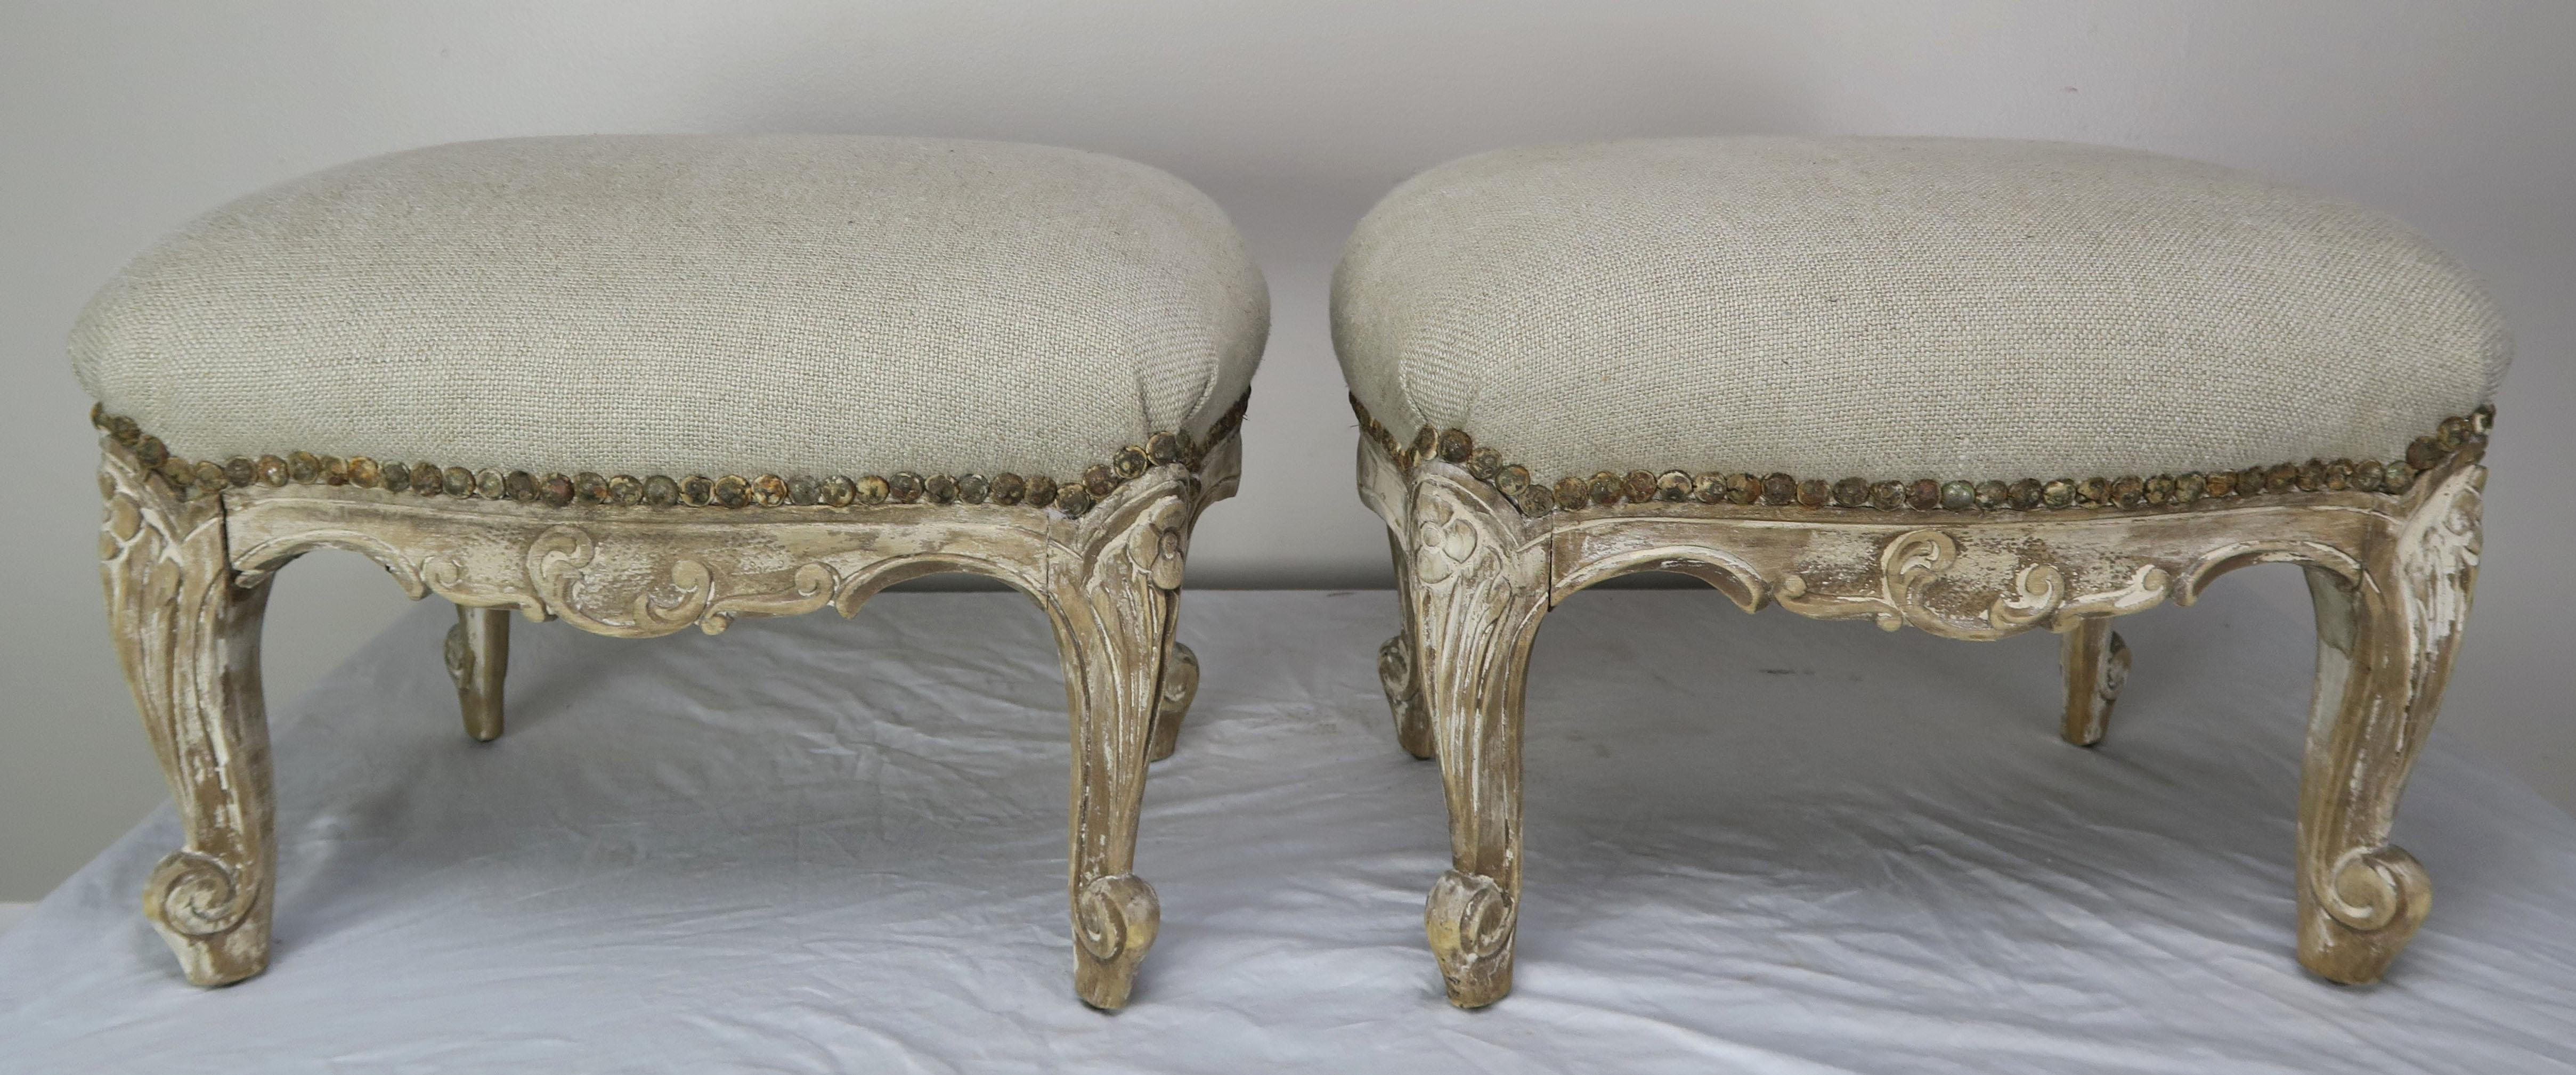 Pair of 19th century French Louis XV style painted benches or footstools. The benches stand on four cabriole legs that end in rams head feet. The painted finish is beautifully worn throughout. They are newly upholstered in washed Belgium linen with